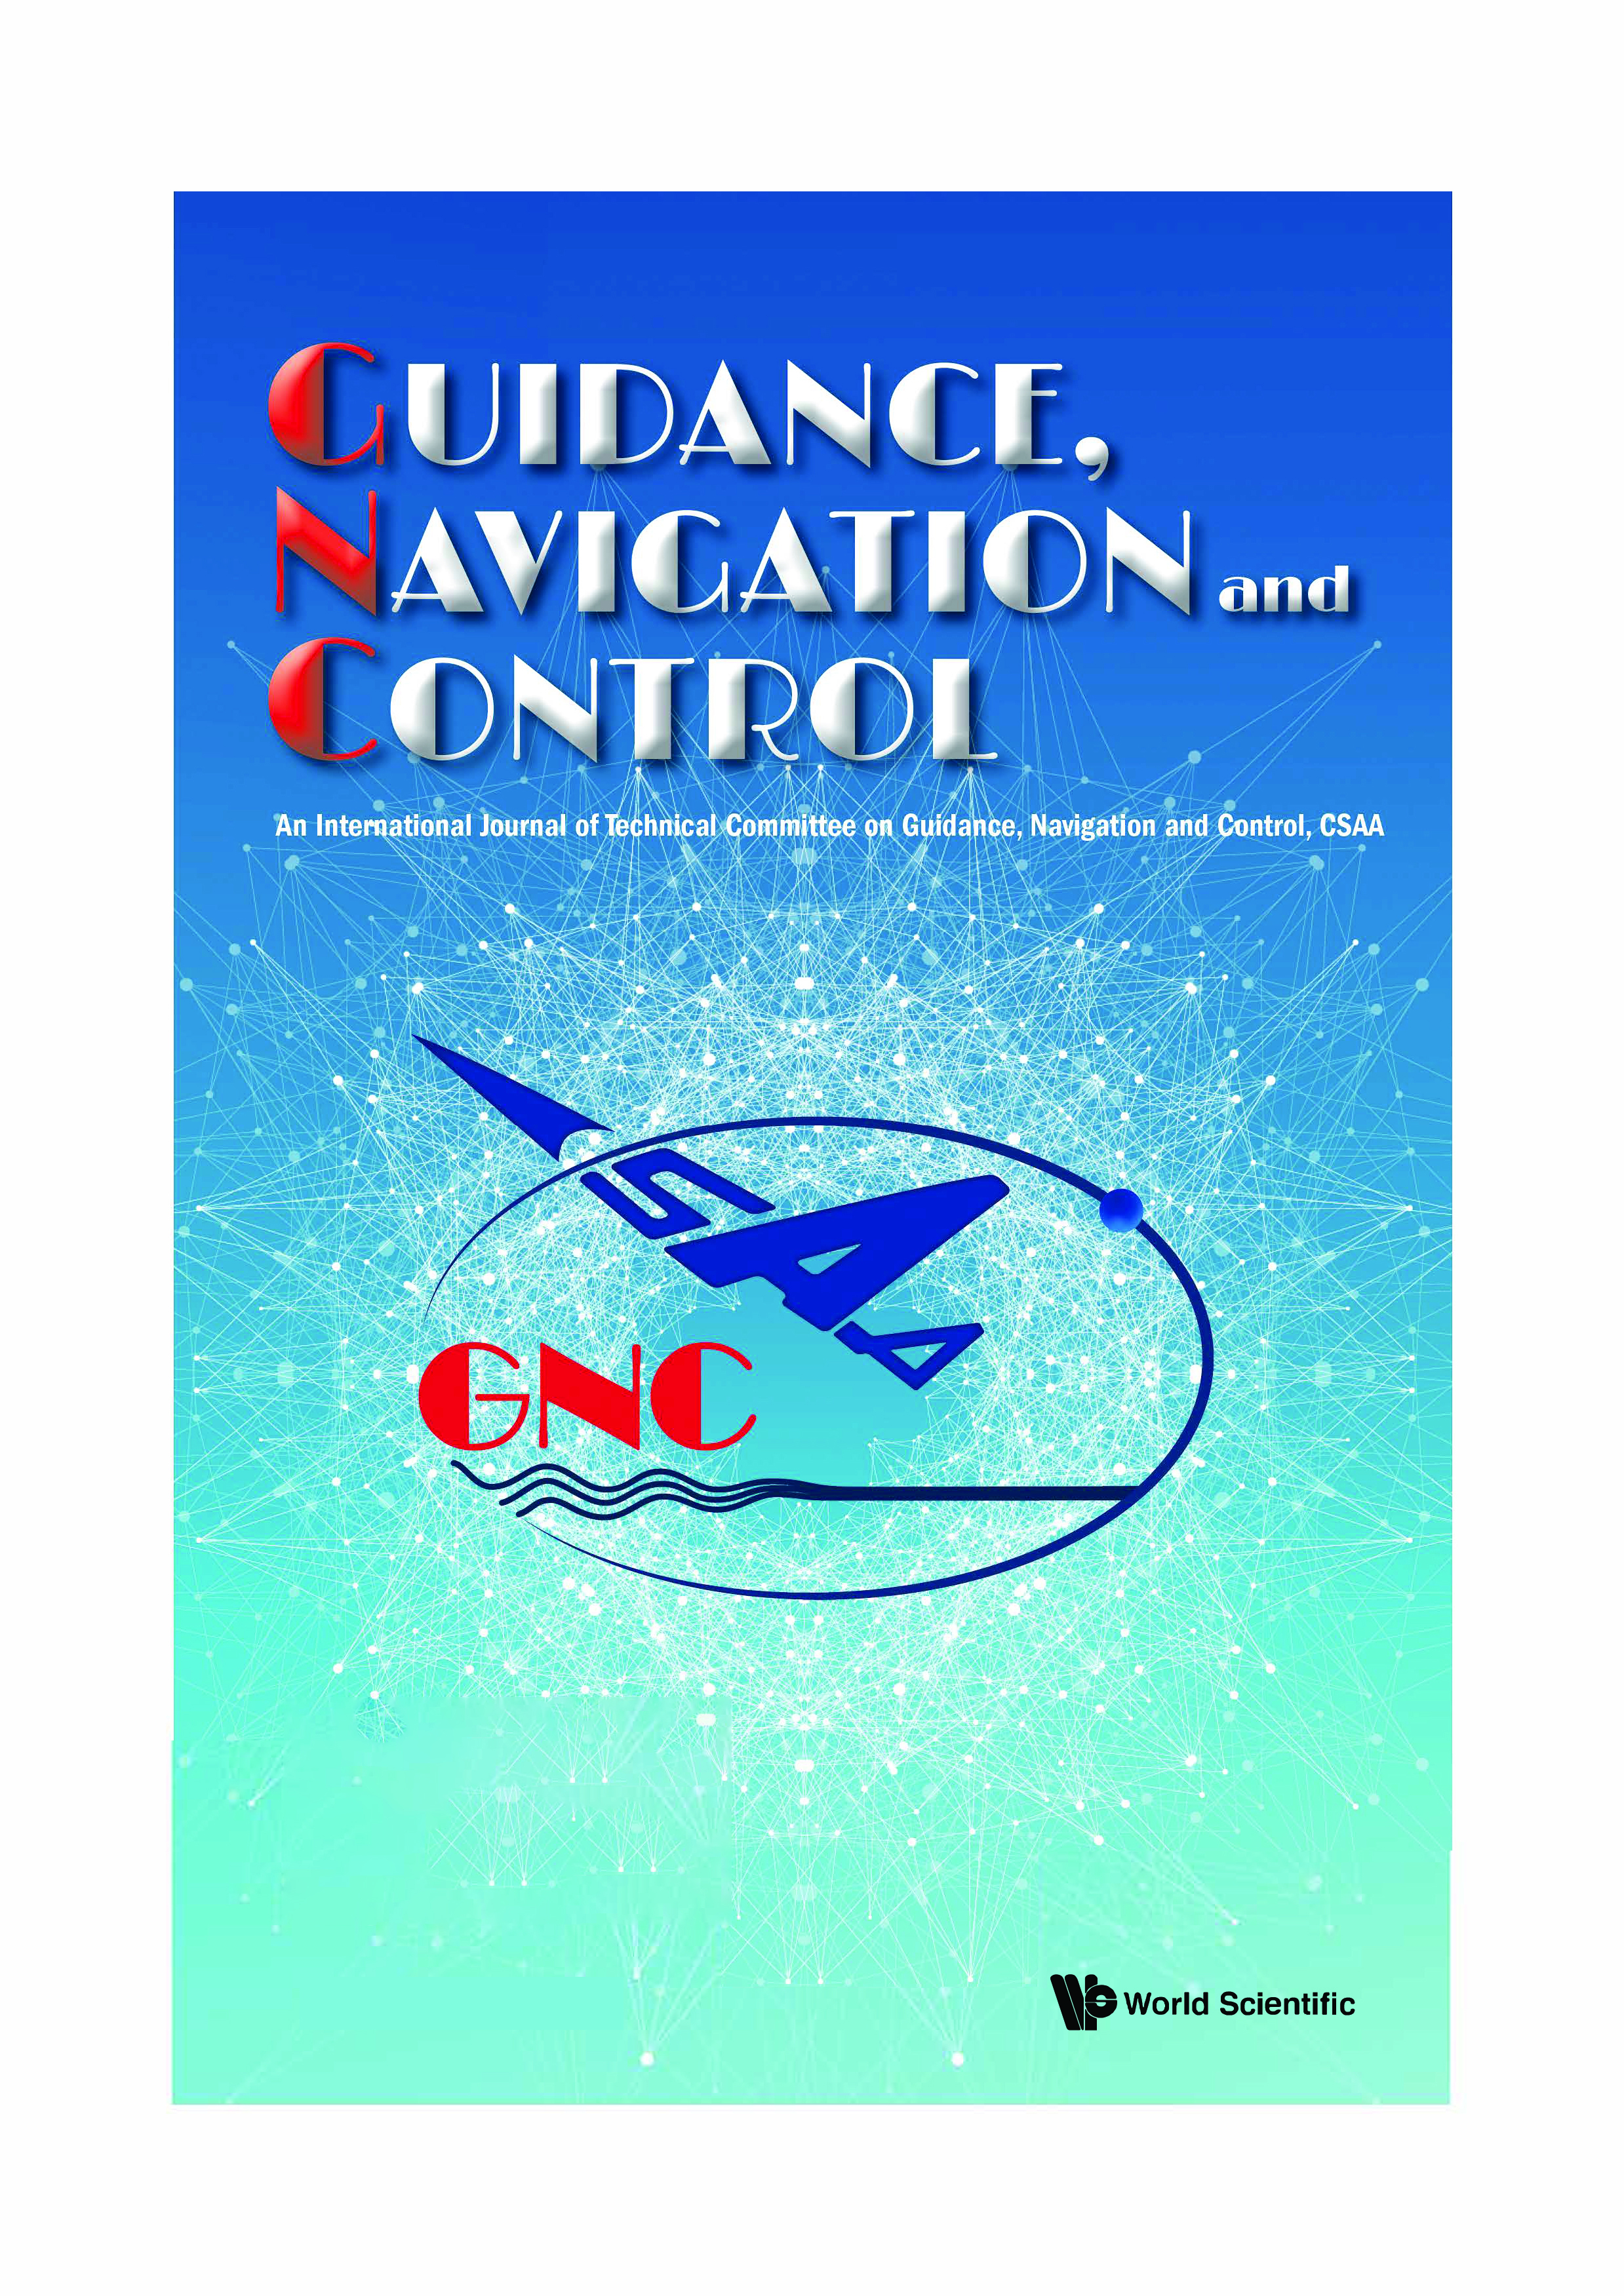 Guidance, Navigation and Control